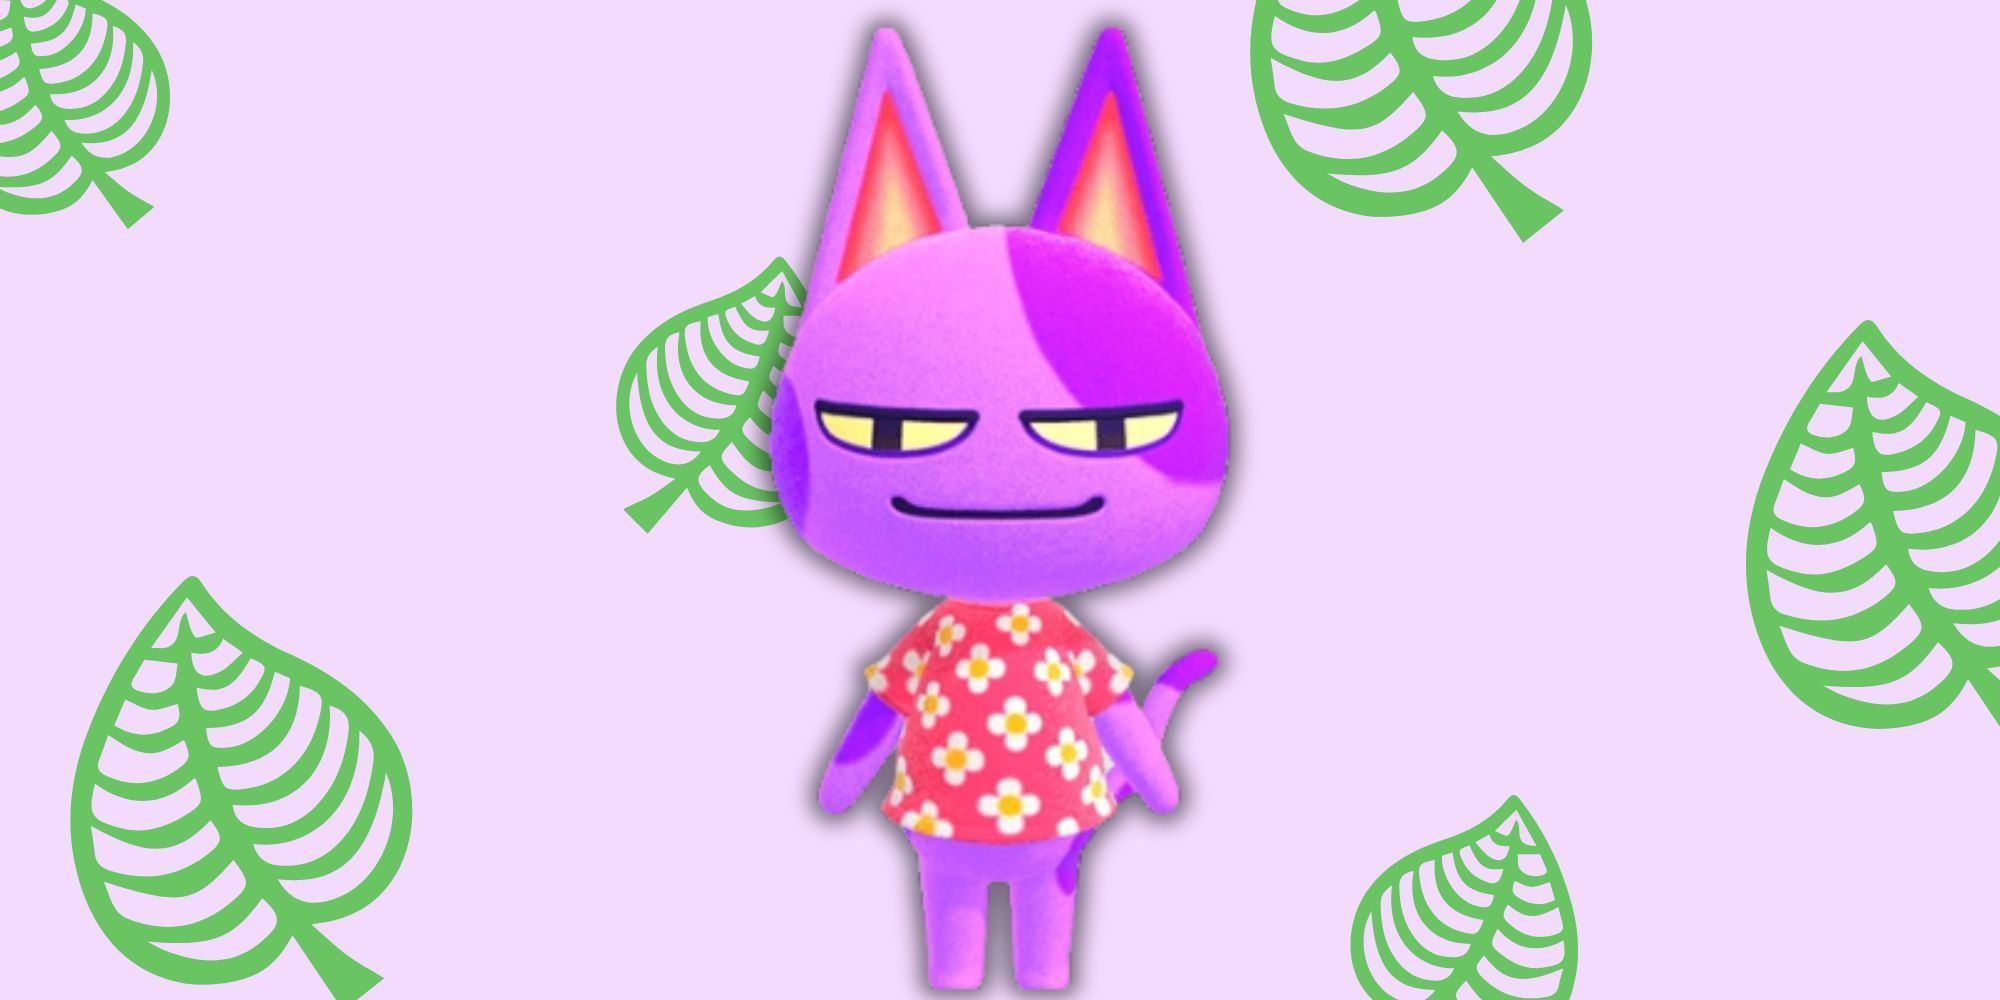 Bob from Animal Crossing in front of leaf-patterned backdrop